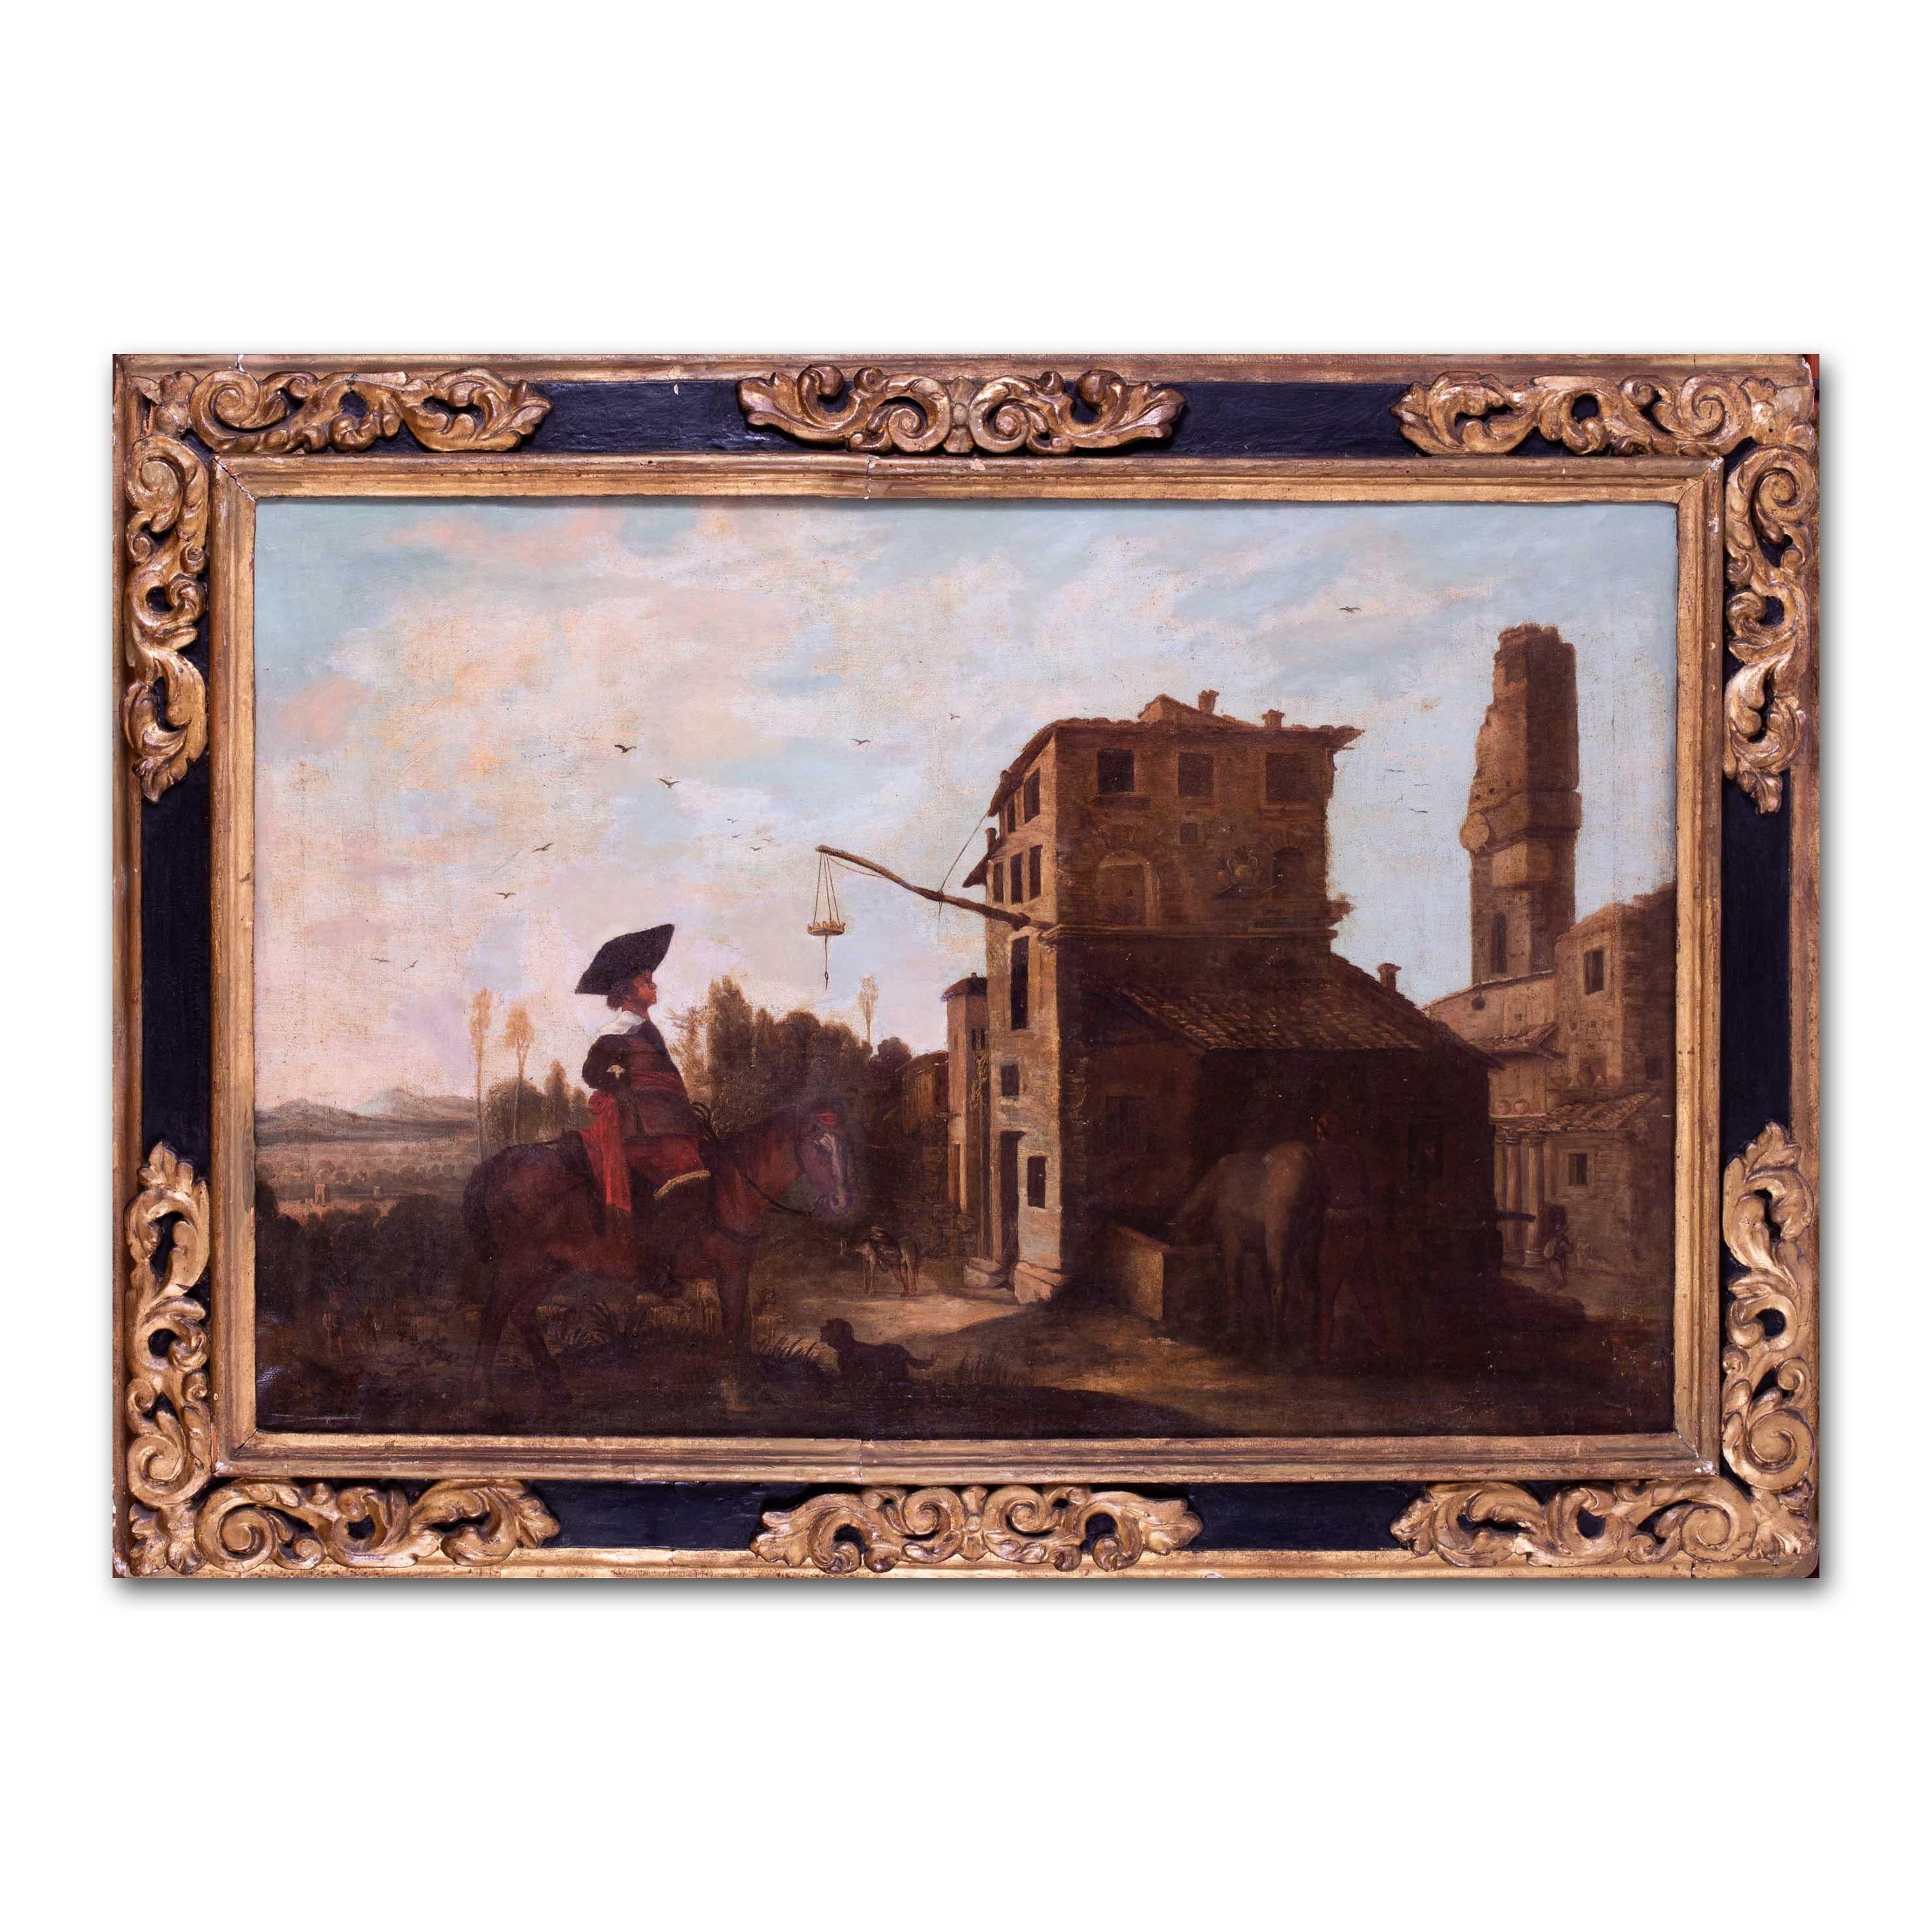 Spanish School (17th Century)
A soldier arriving at a village
Oil on canvas
29 x 43.1/4 in. (74 x 110 cm.)

Oil on canvas, not relined. Surface dirt and varnish discolouration. Various repairs. There is a line through the vertical reverting to the